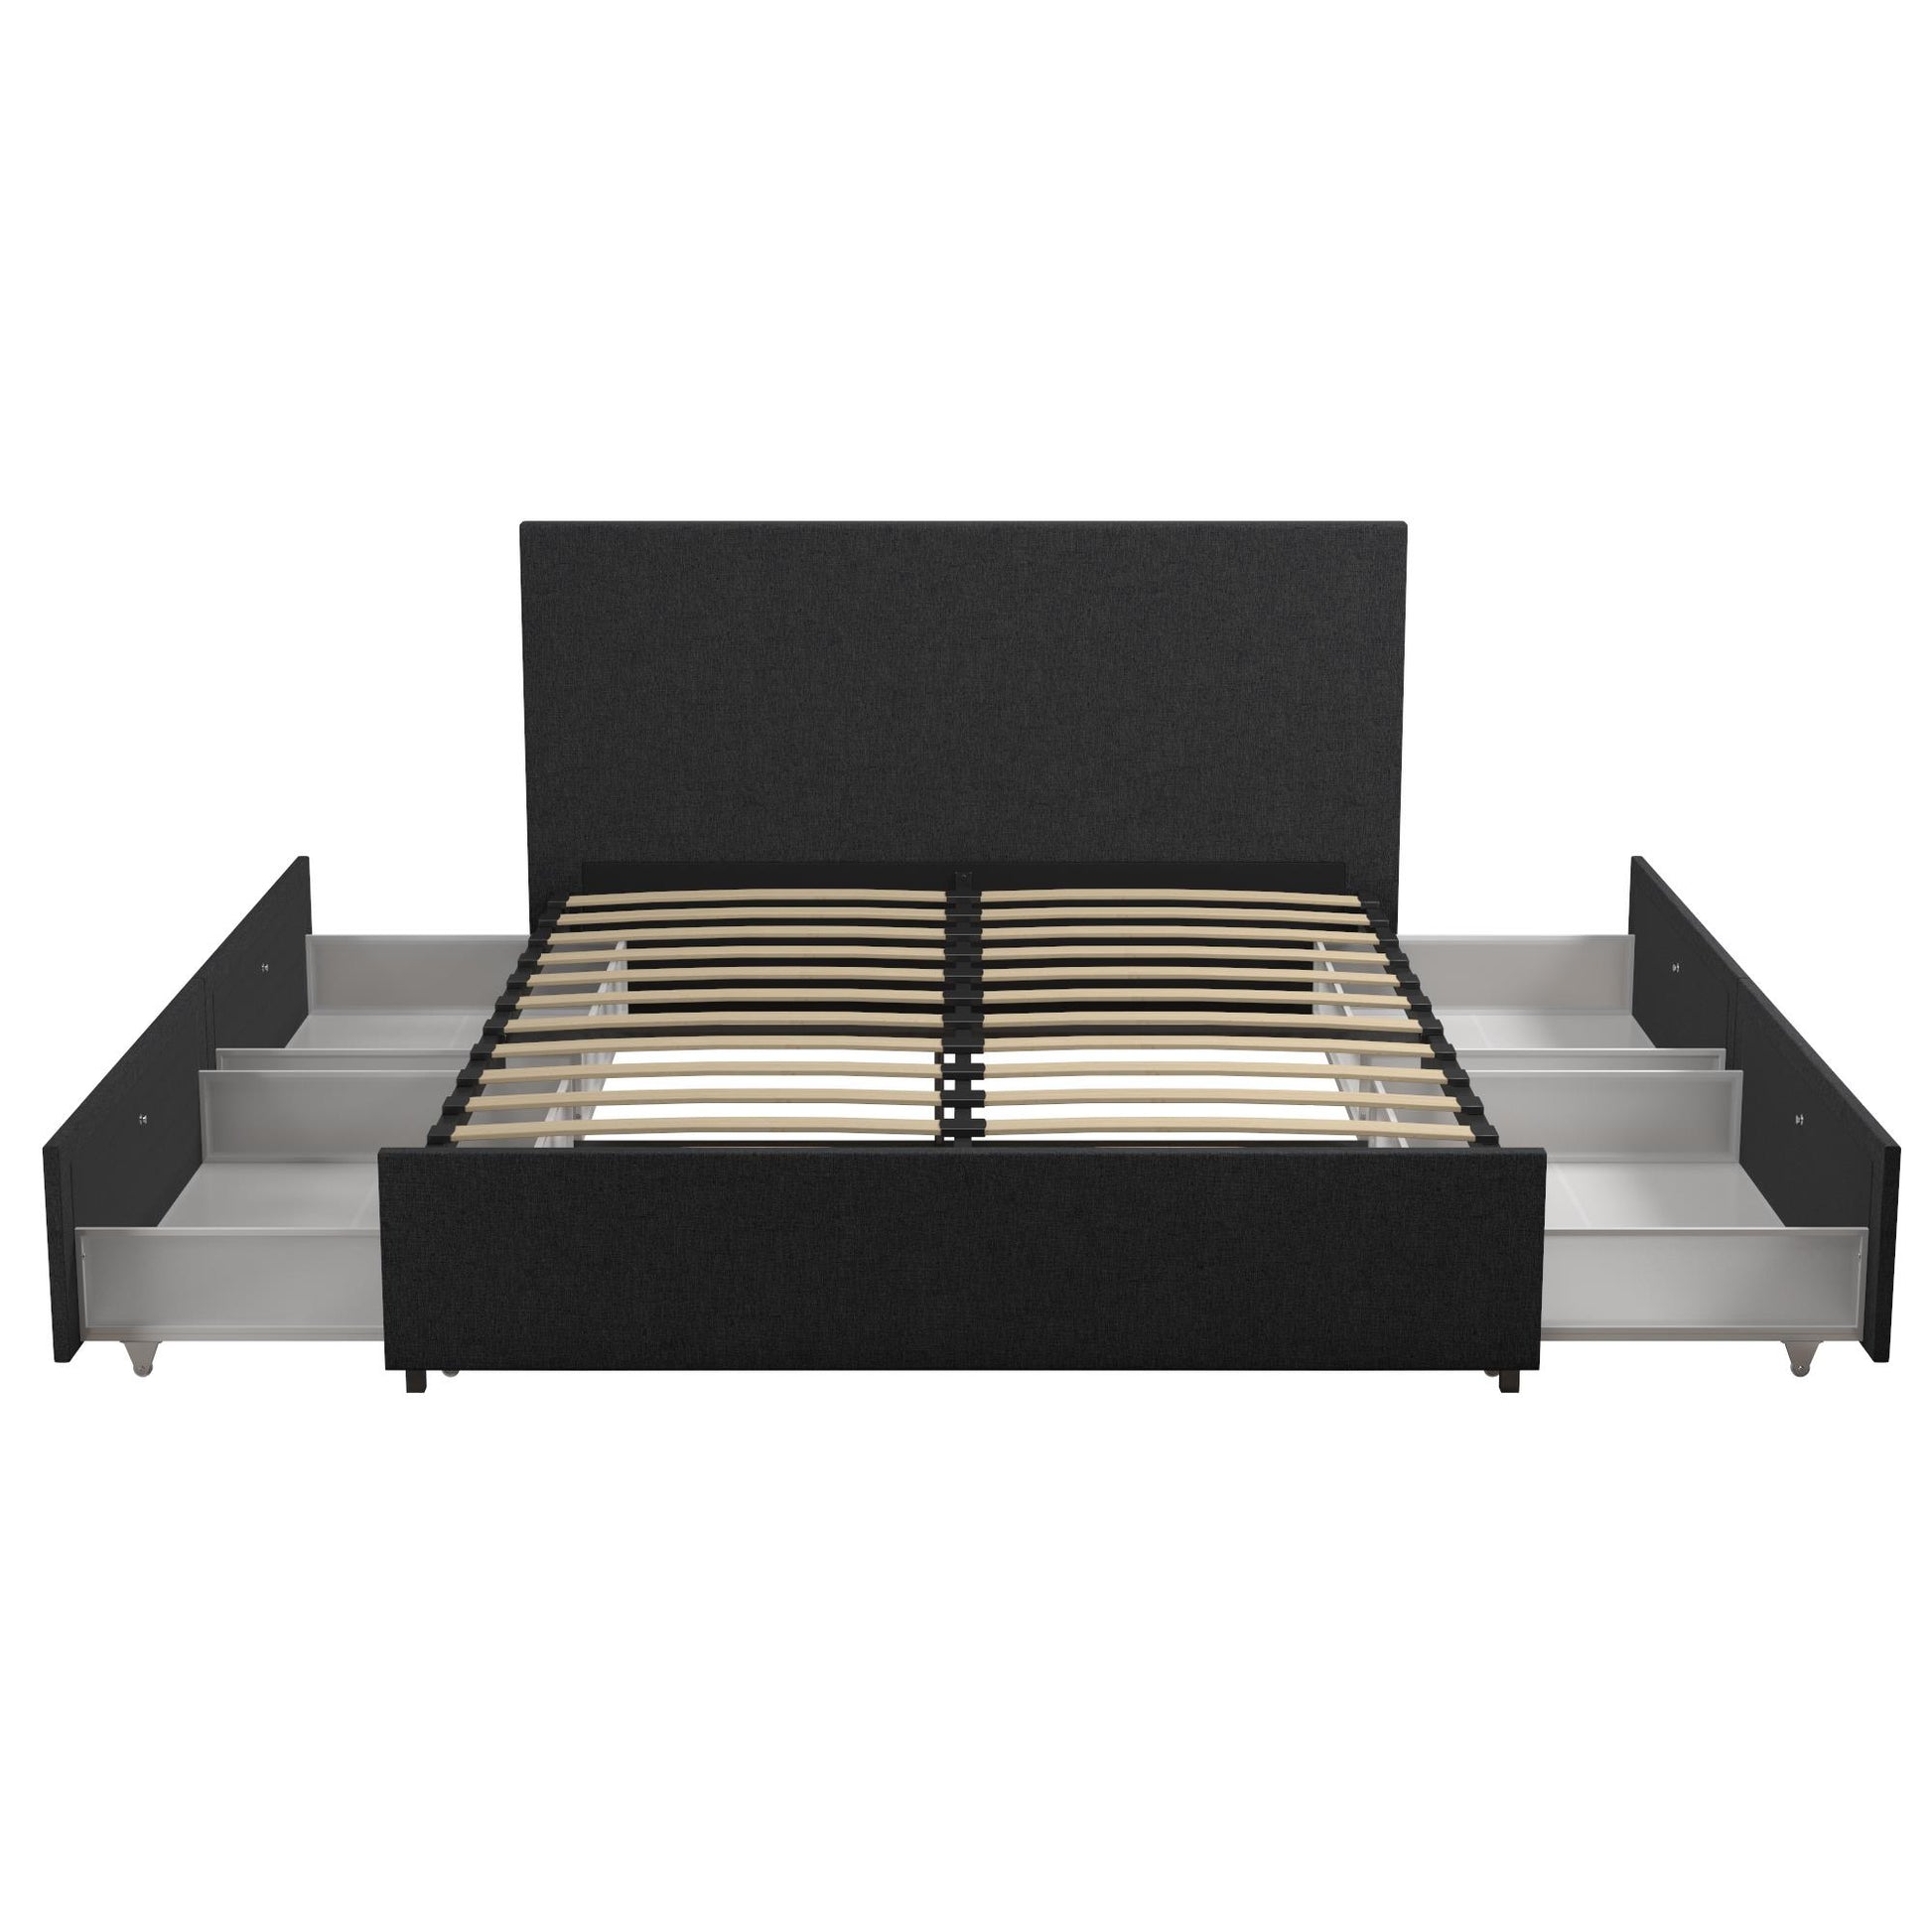 Kelly Upholstered Bed with Storage - Dark Gray Linen - Queen